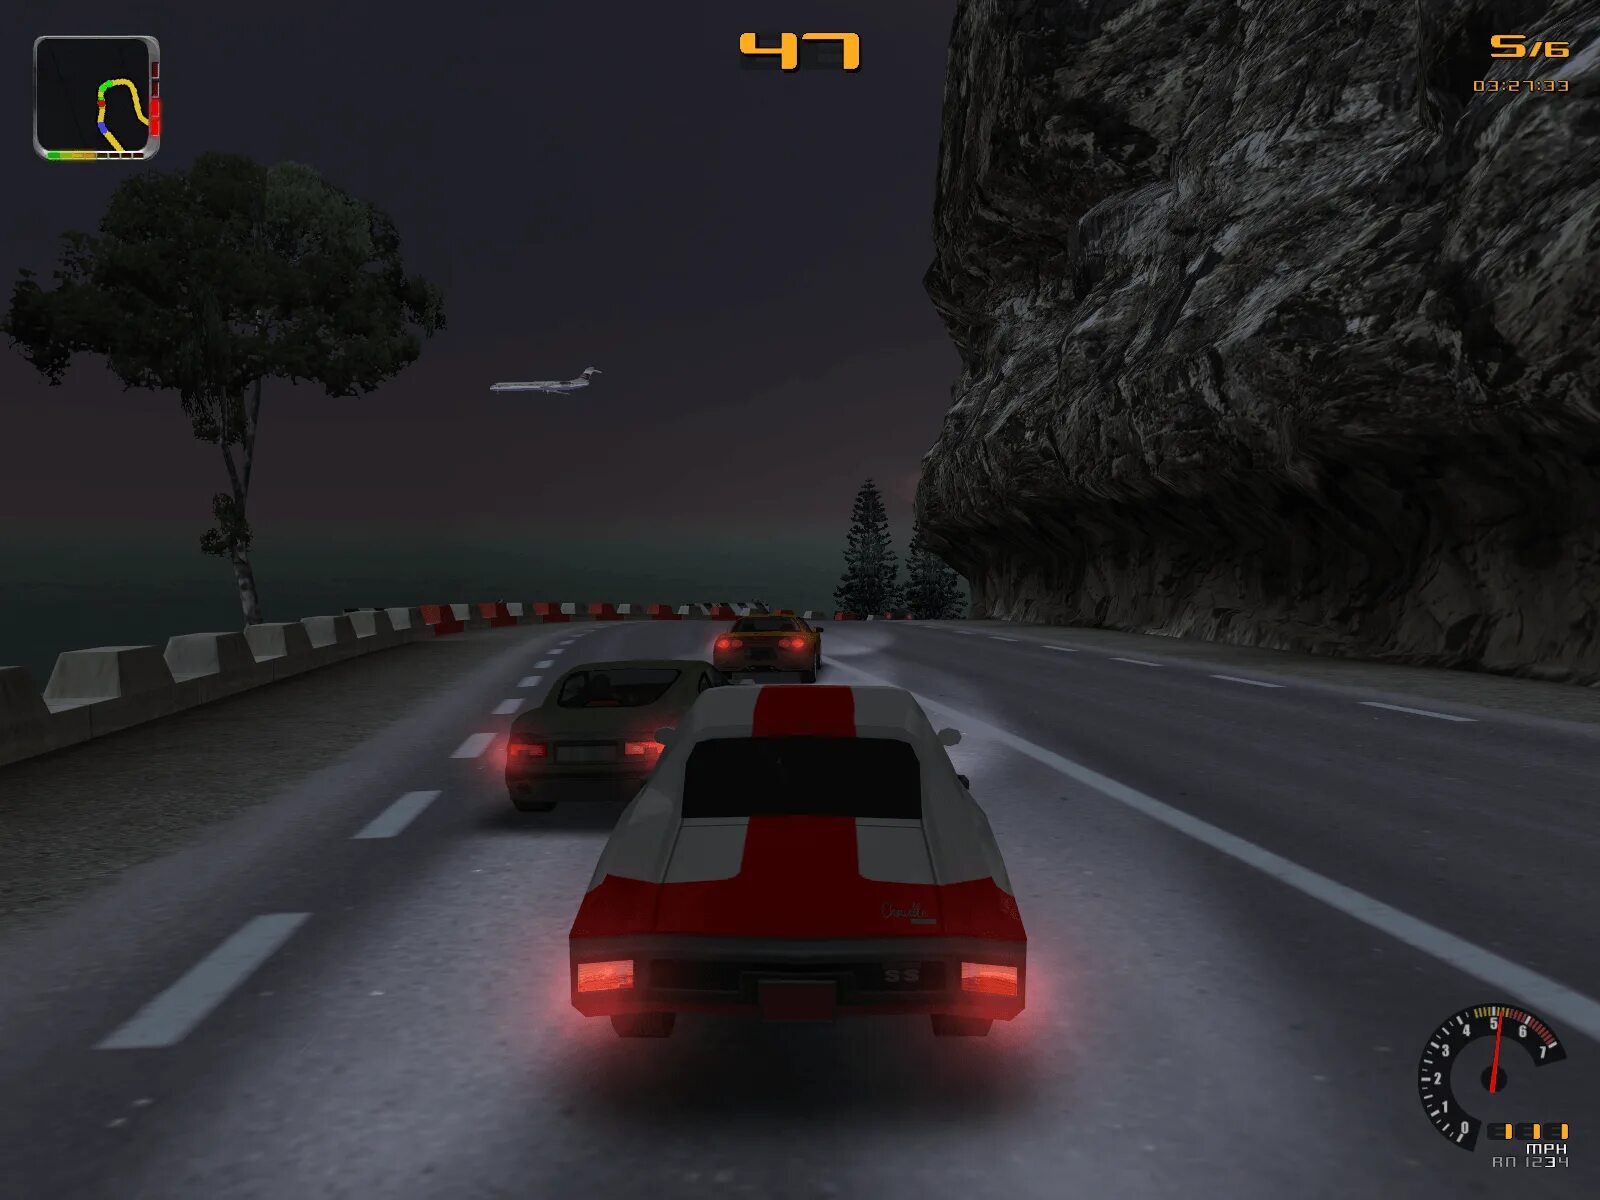 X game driver. Test Drive игра 2002. Test Drive 2002 ps2. Test Drive Overdrive: the Brotherhood of Speed. Test Drive игра 2004.